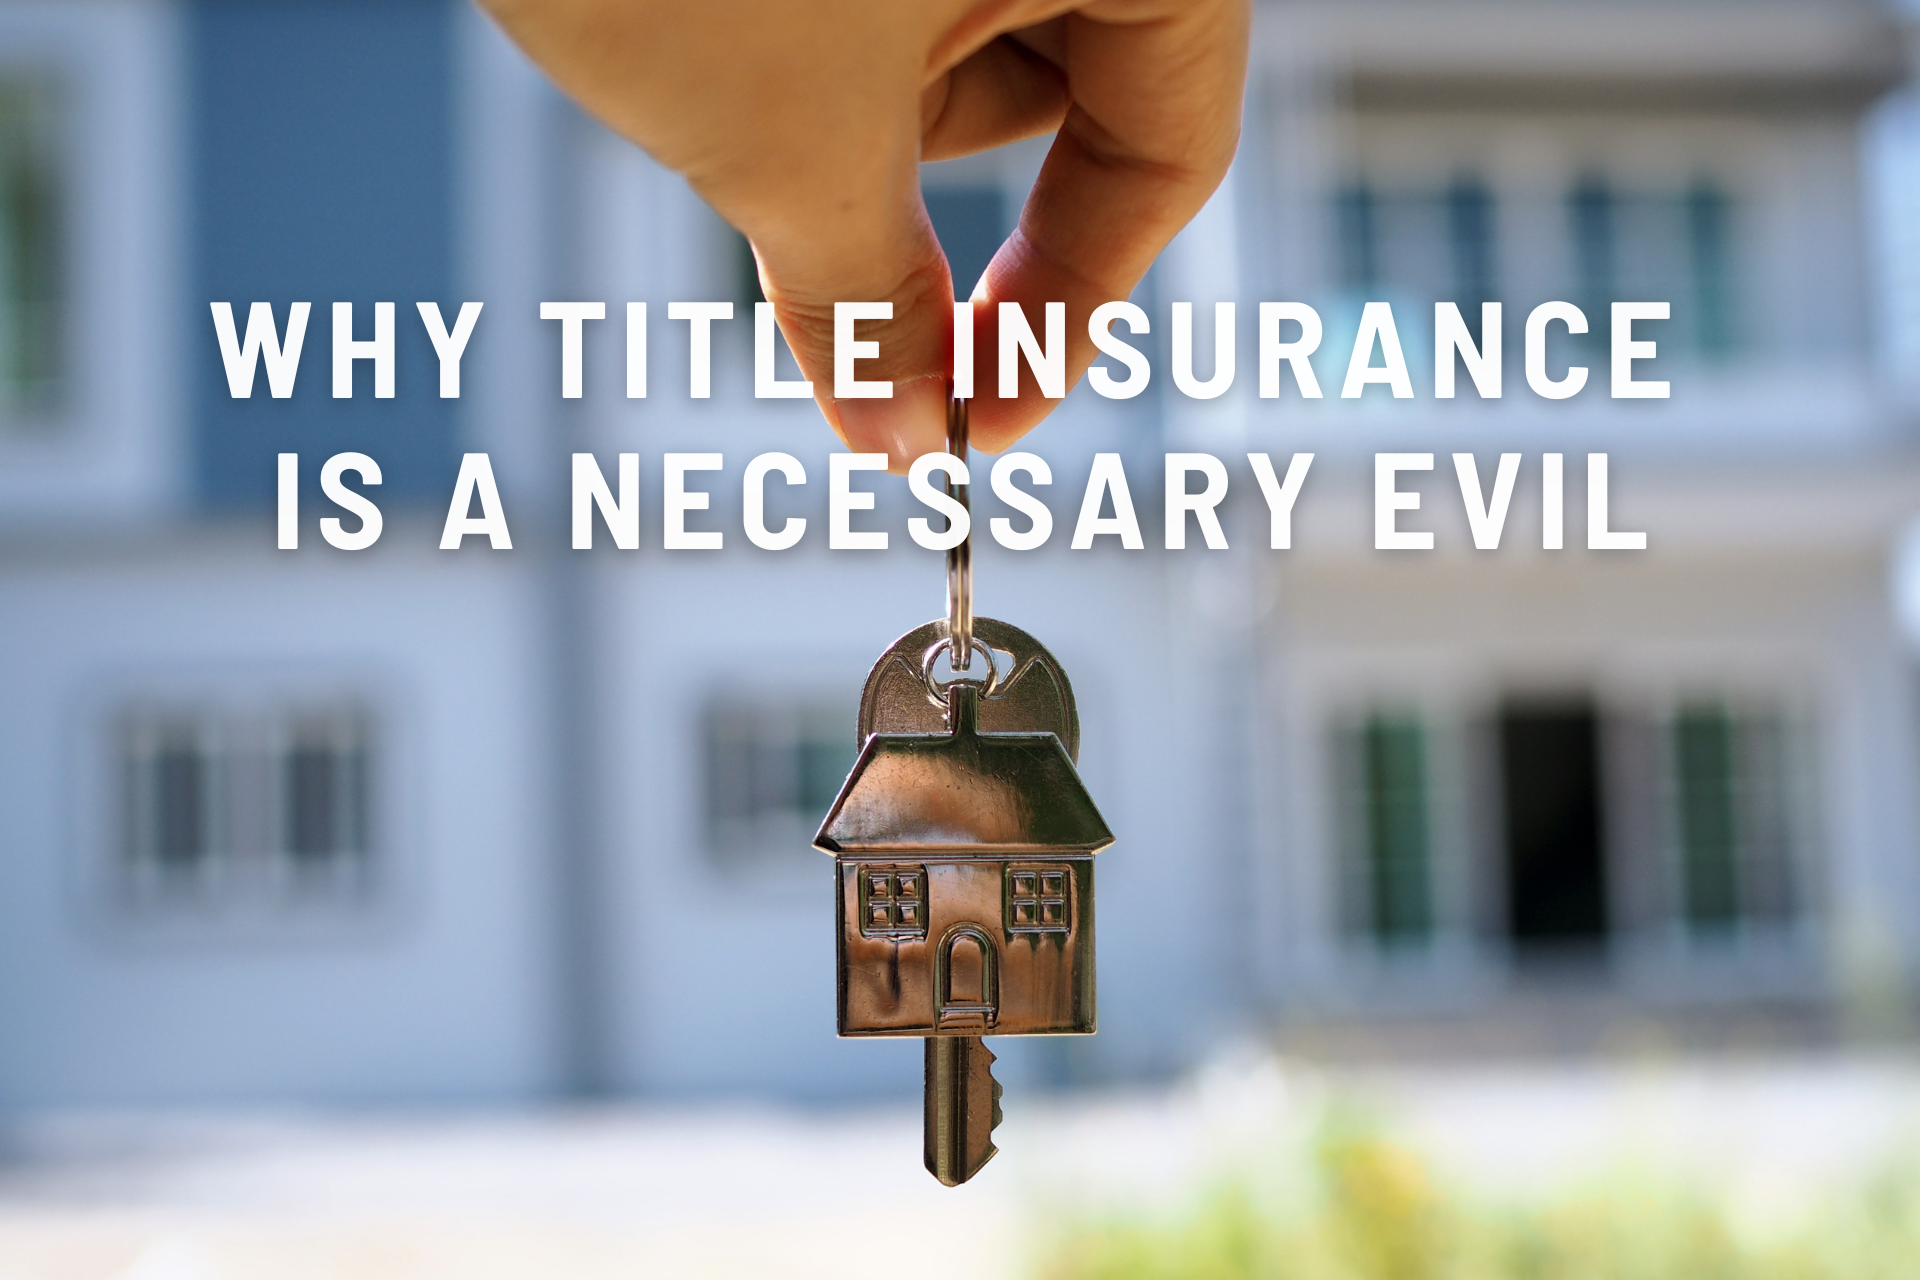 title insurance is important